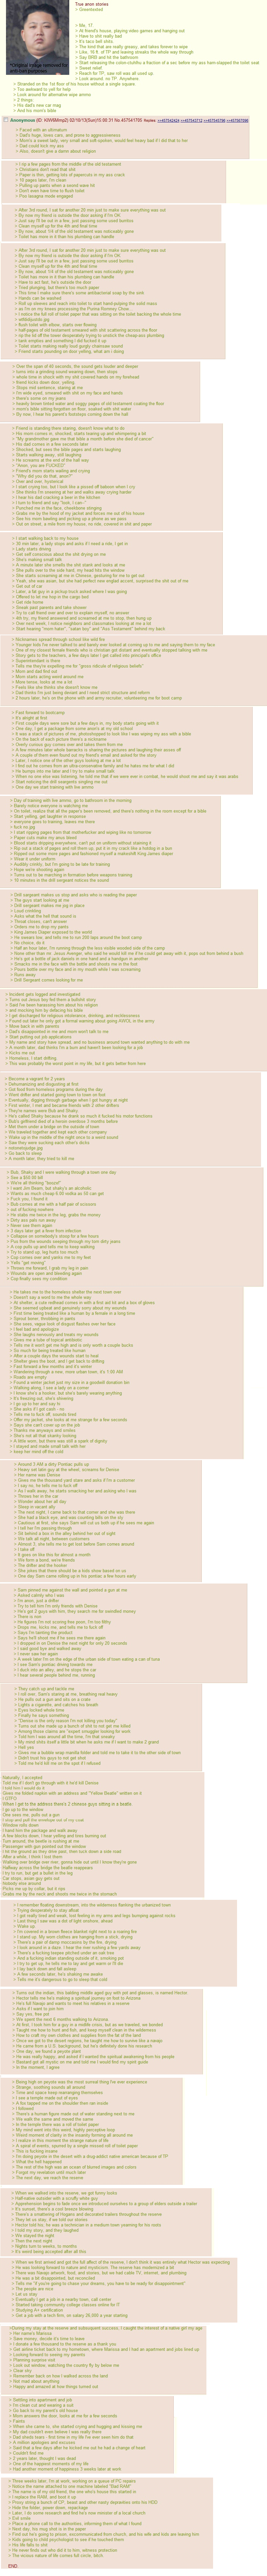 My favorite green text story. My favorite green text story of all time, to contribute to the green text story rampage. Re-upload because the first one was flagg